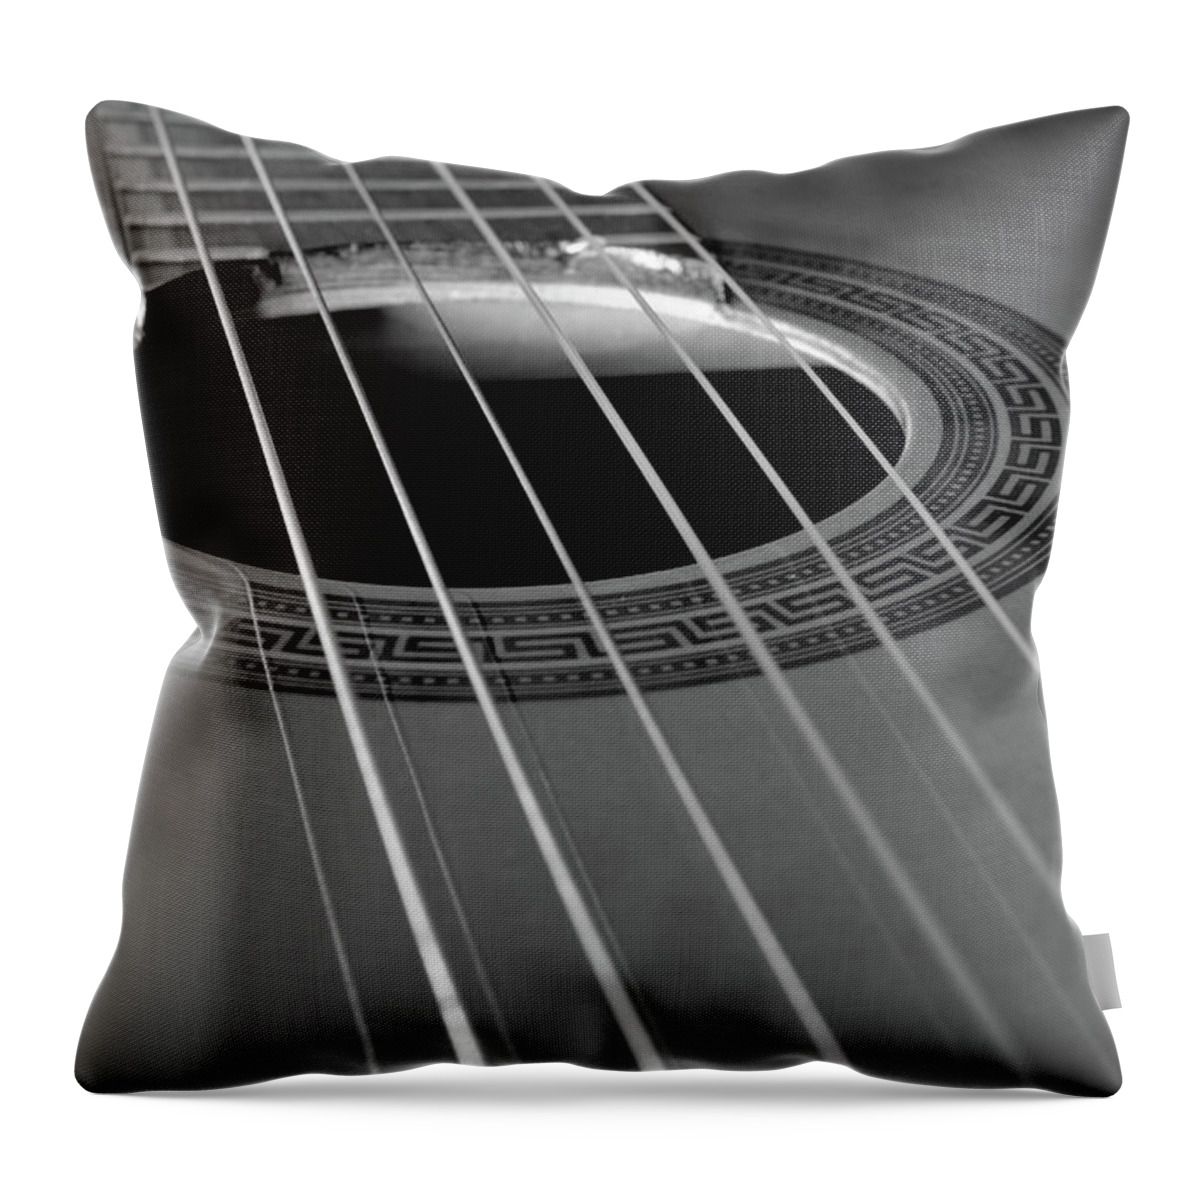 Spanish Guitar Throw Pillow featuring the photograph Six Guitar Strings by Angelo DeVal